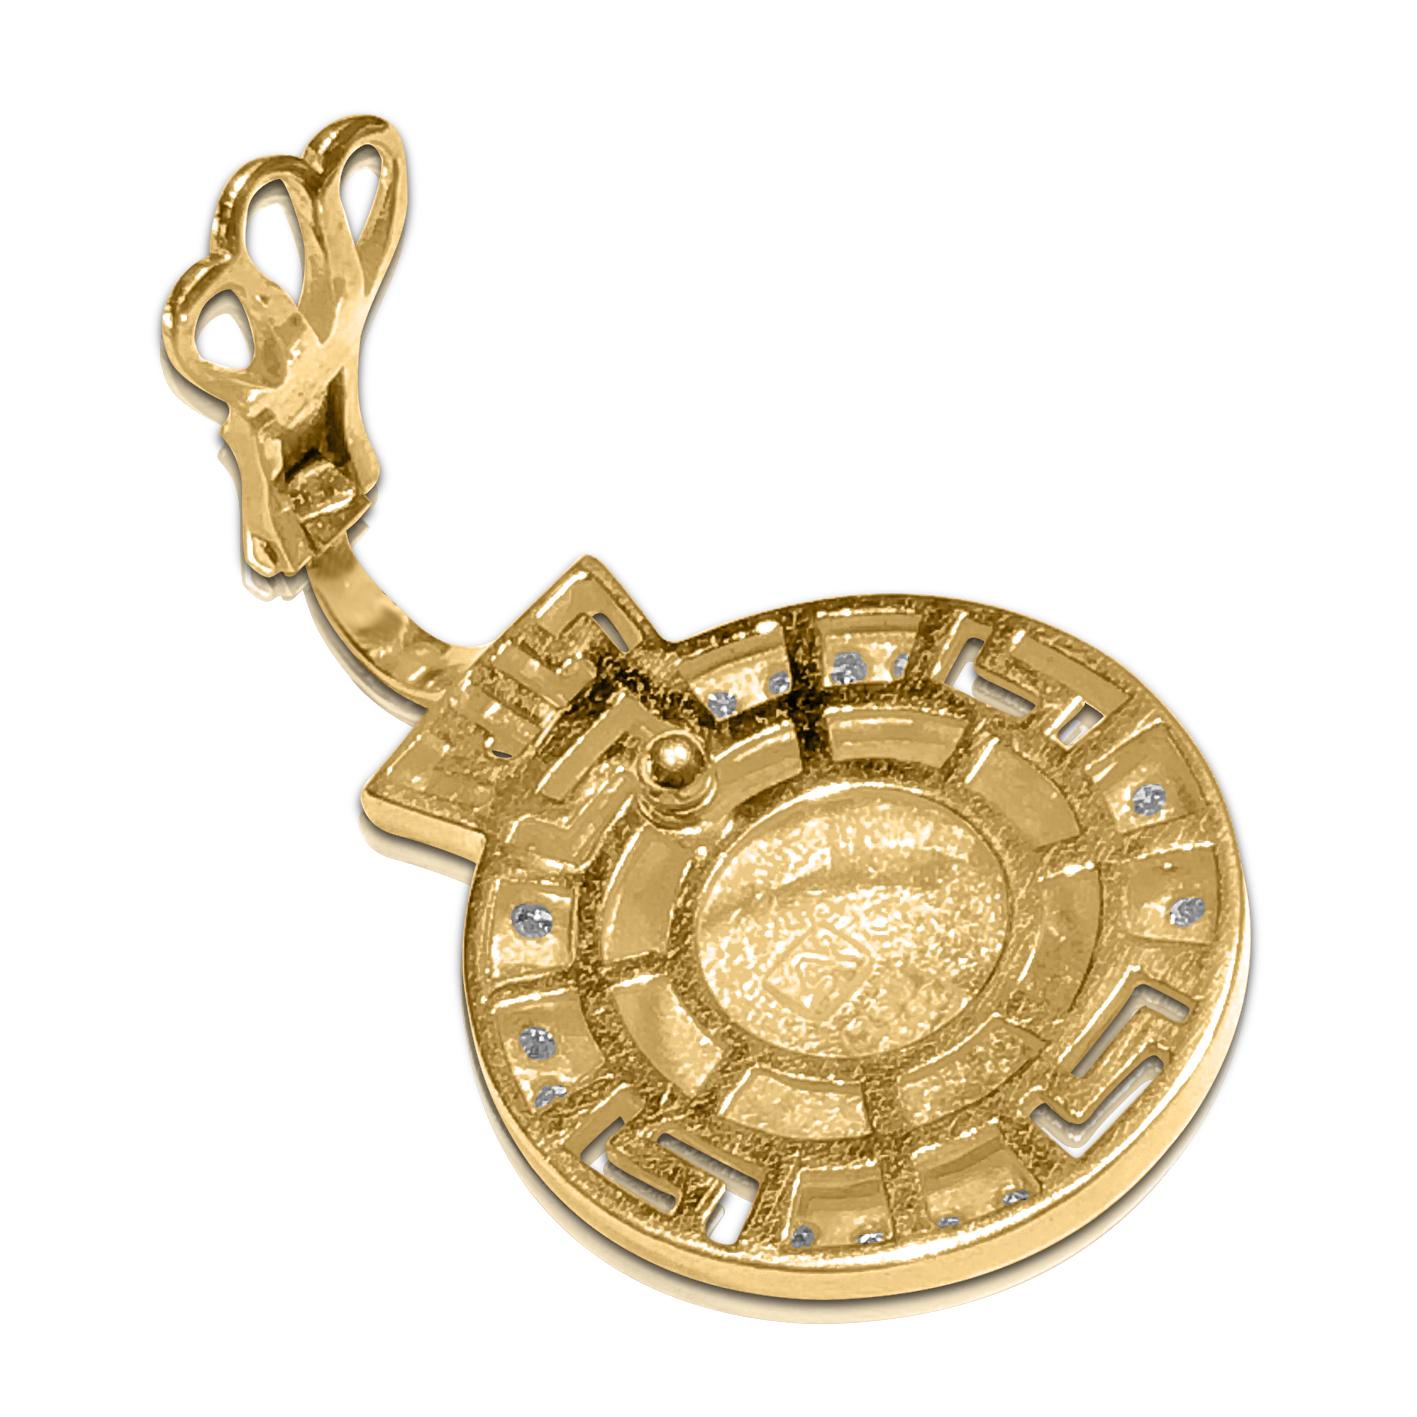 S.Georgios solid 18 Karat Yellow Gold Coin Pendant is all made by hand and features a Gold Coin of Alexander the Great, (the coin is an exact copy of the original) the Symbol of Strength and has Brilliant cut Diamonds around the coin total weight of